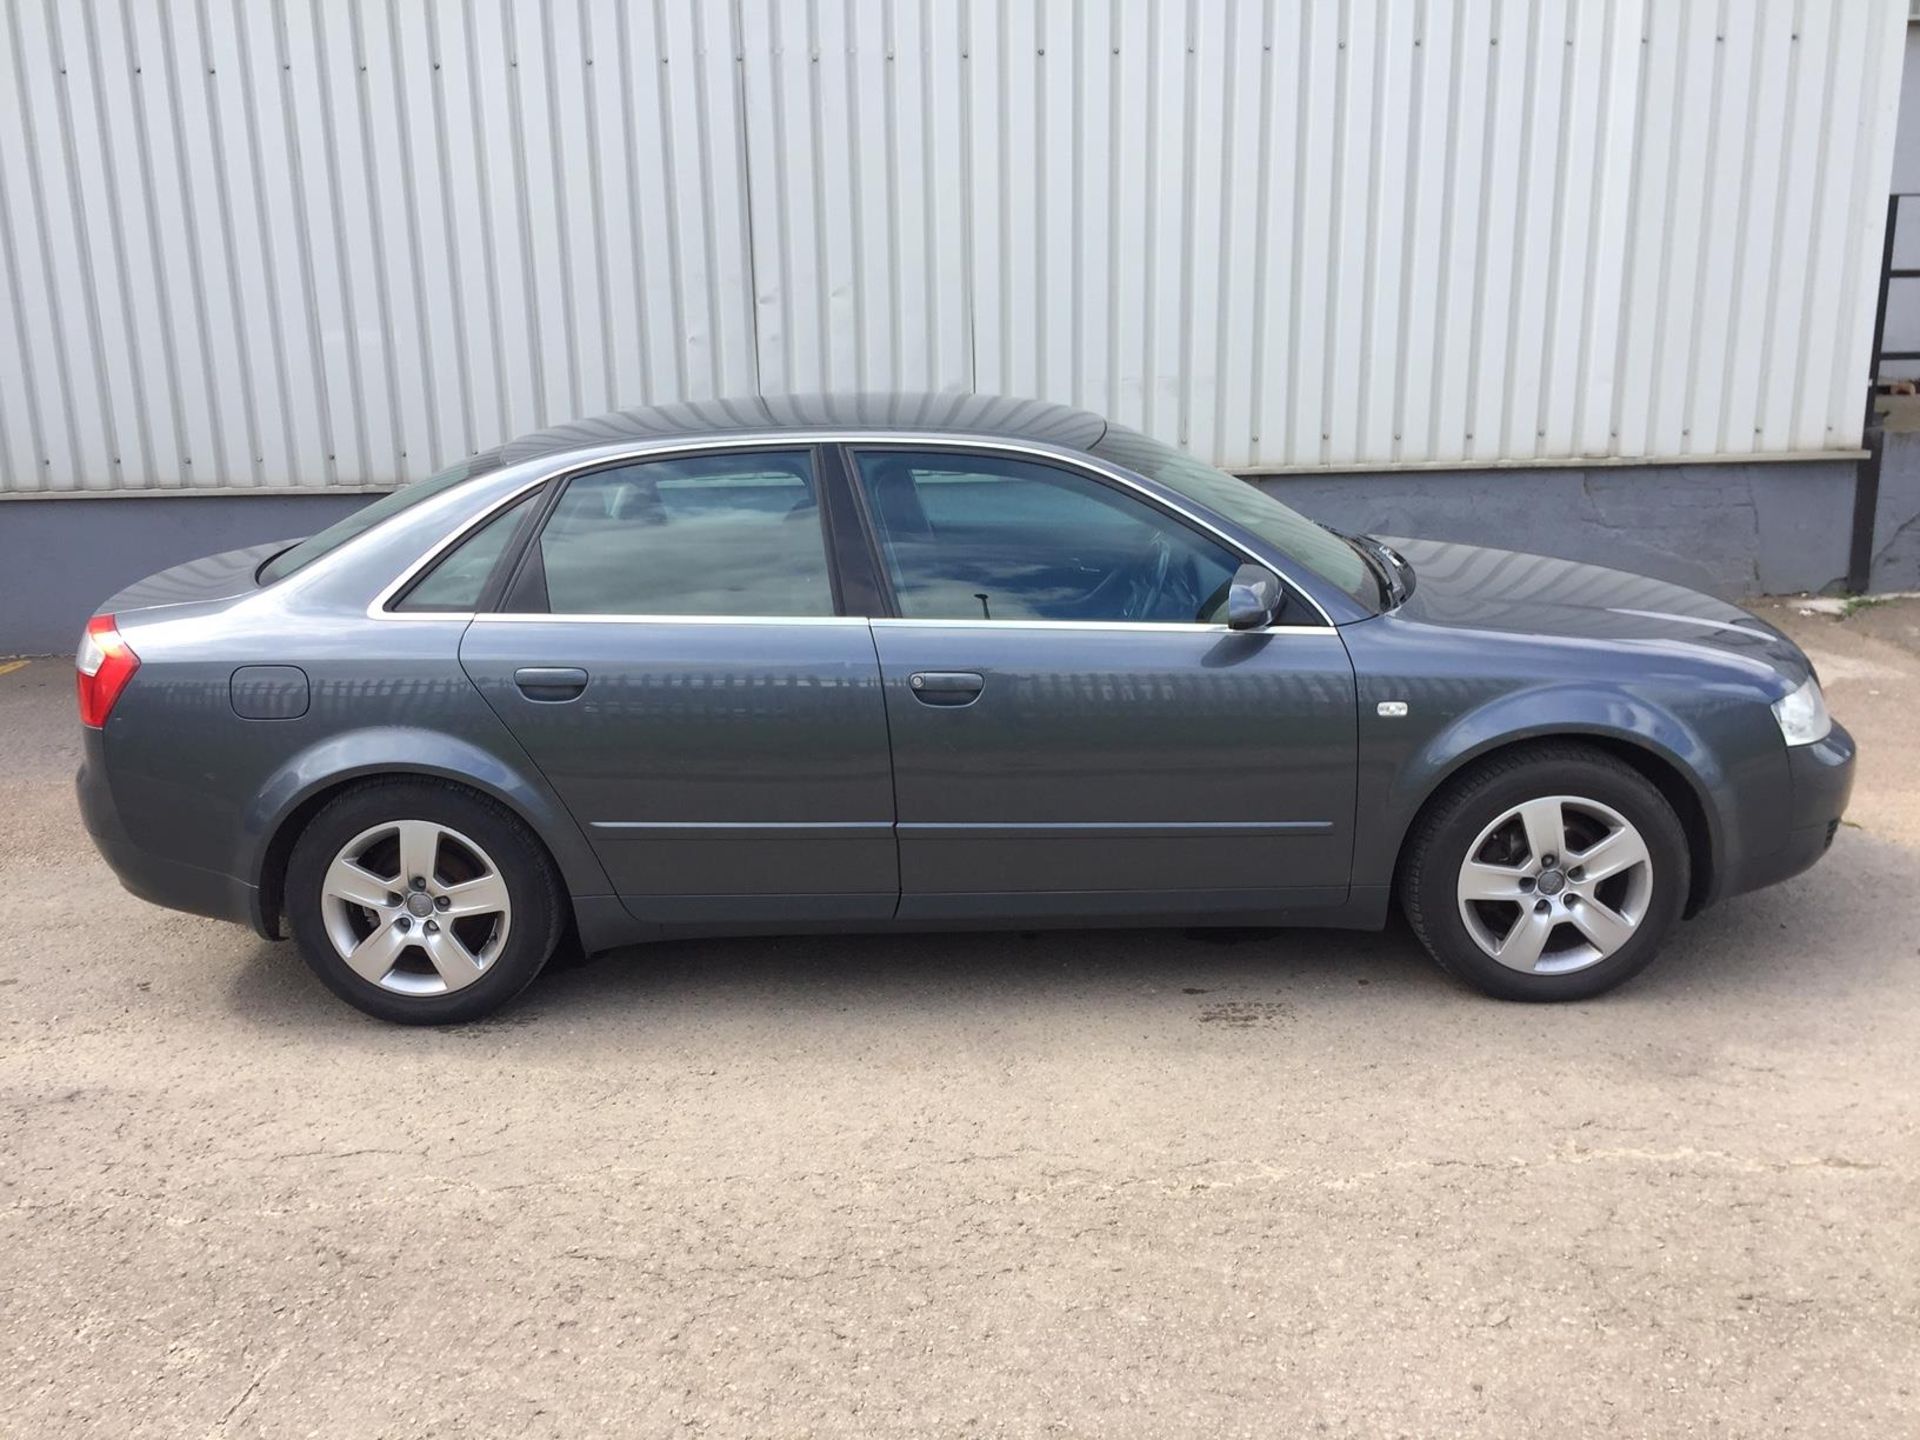 2003 Audi A4 Quattro 1.9 Tdi SE 4 Dr Saloon - CL505 - NO VAT ON THE HAMMER - Location: Corby, Northa - Image 7 of 15